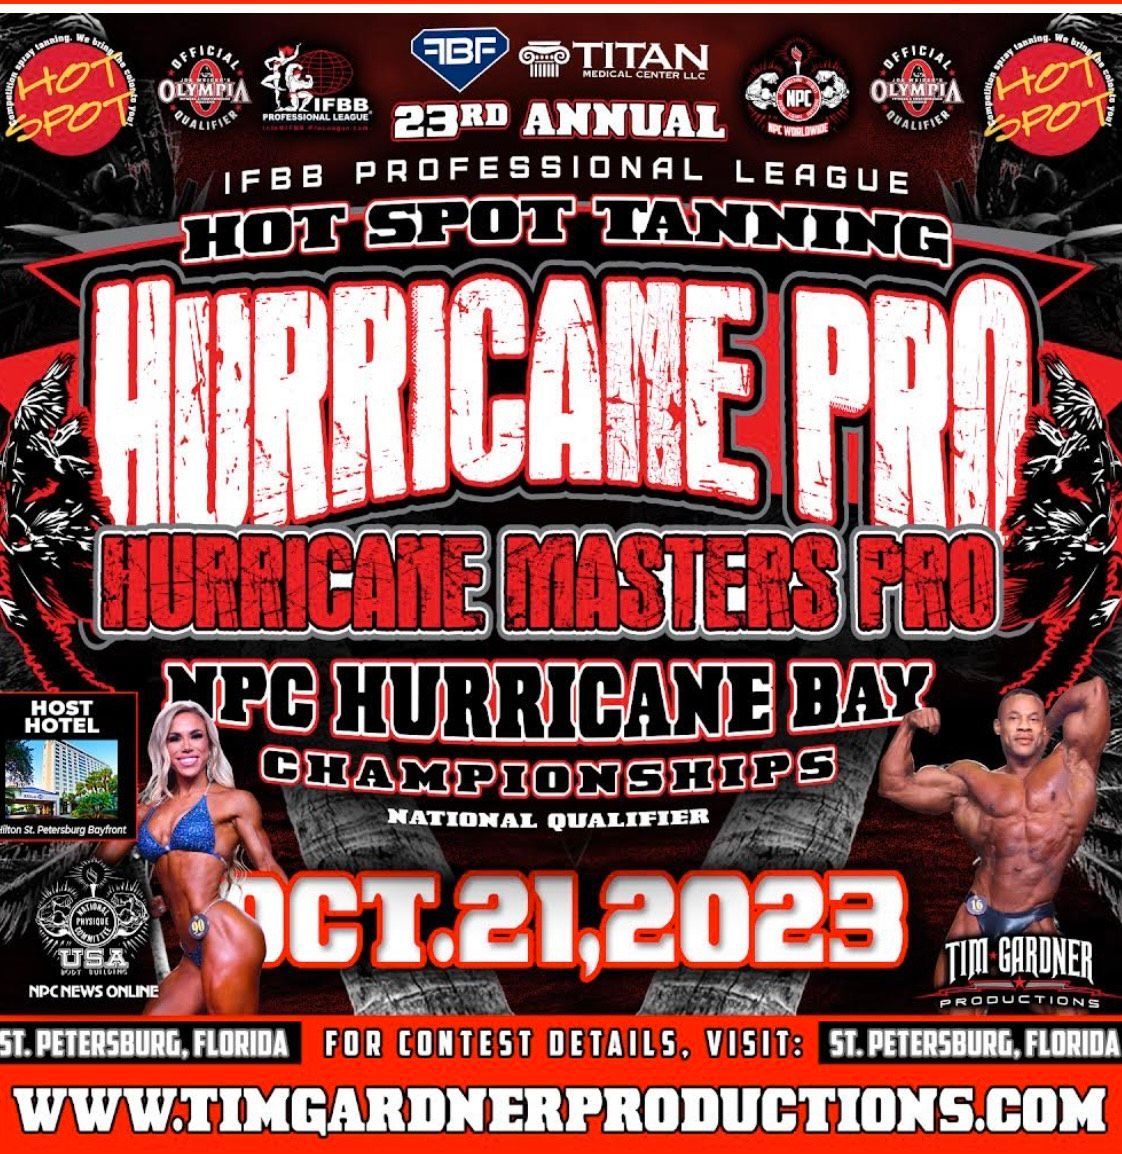 A poster for the hurricane pro hot spot tanning championships